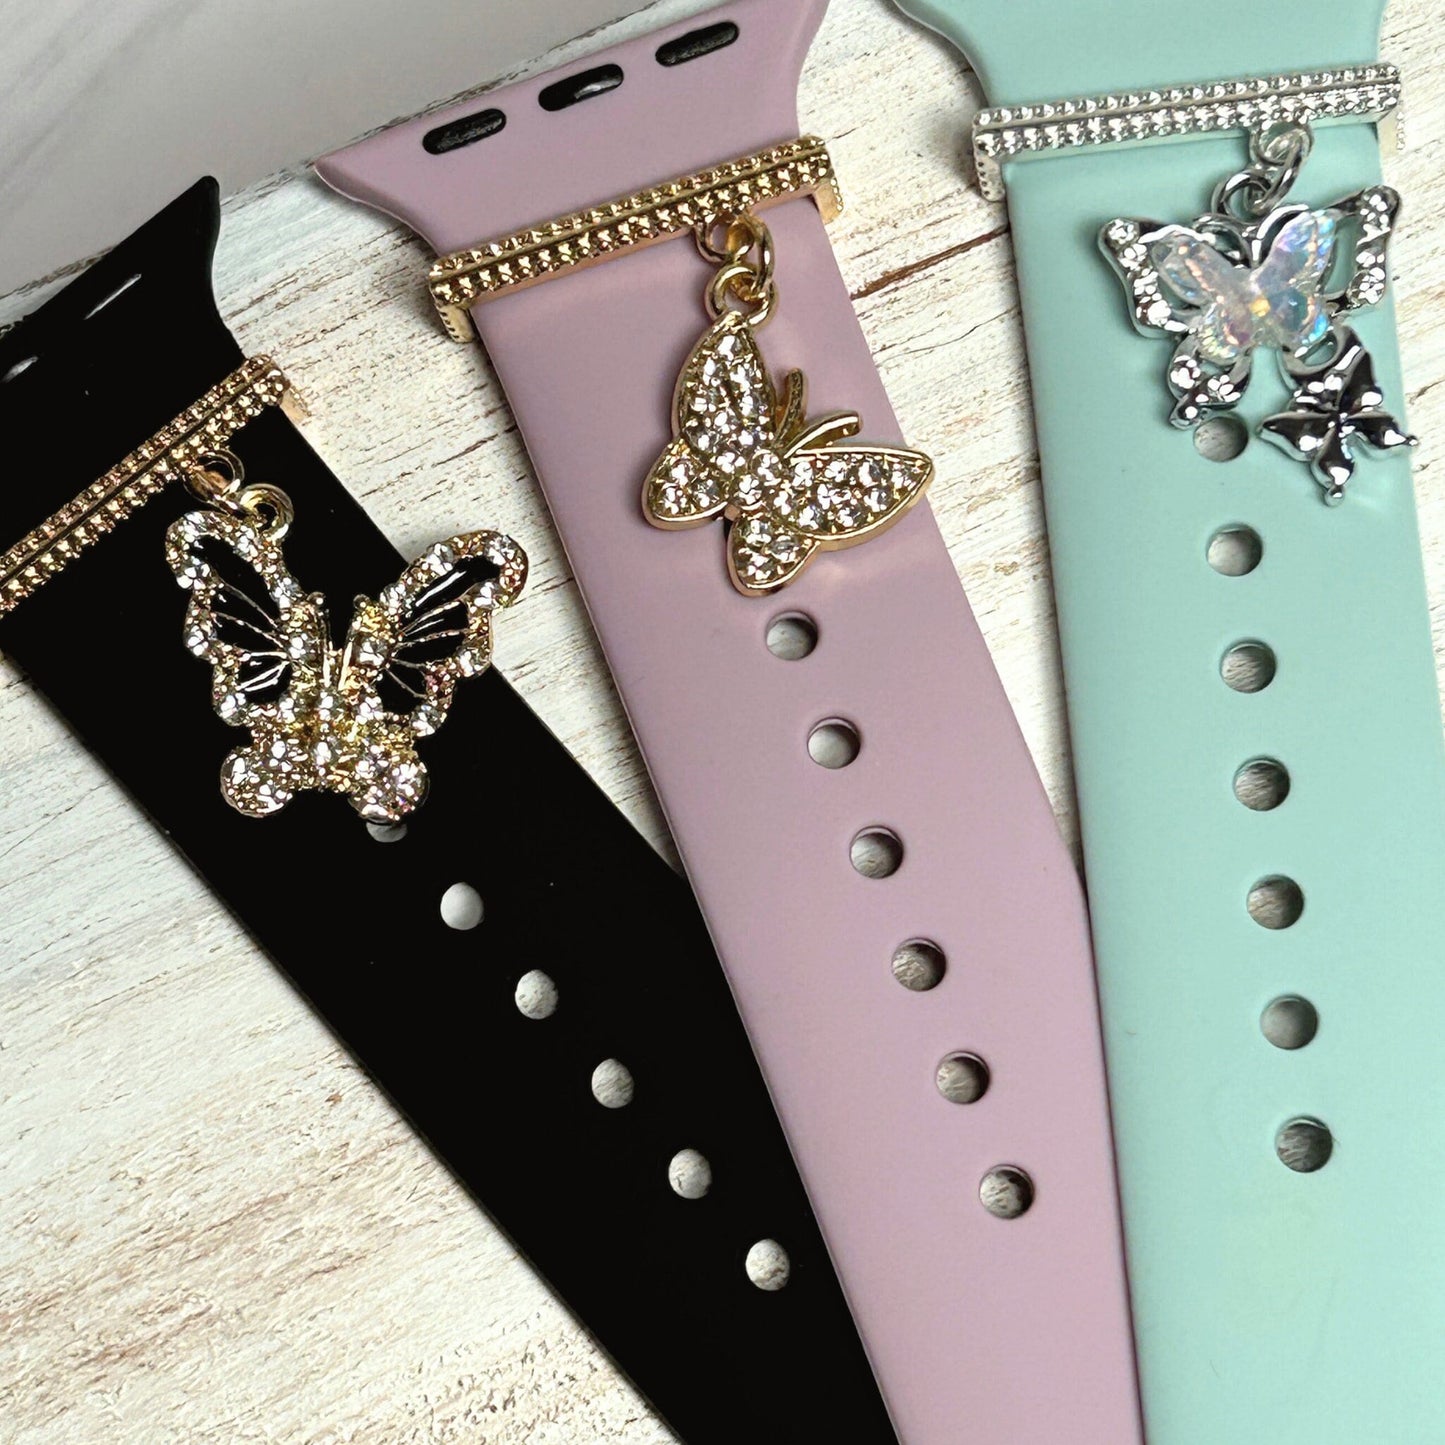 Spring Butterfly Watchband Charms, Watchband Jewelry, Spring Watchbands